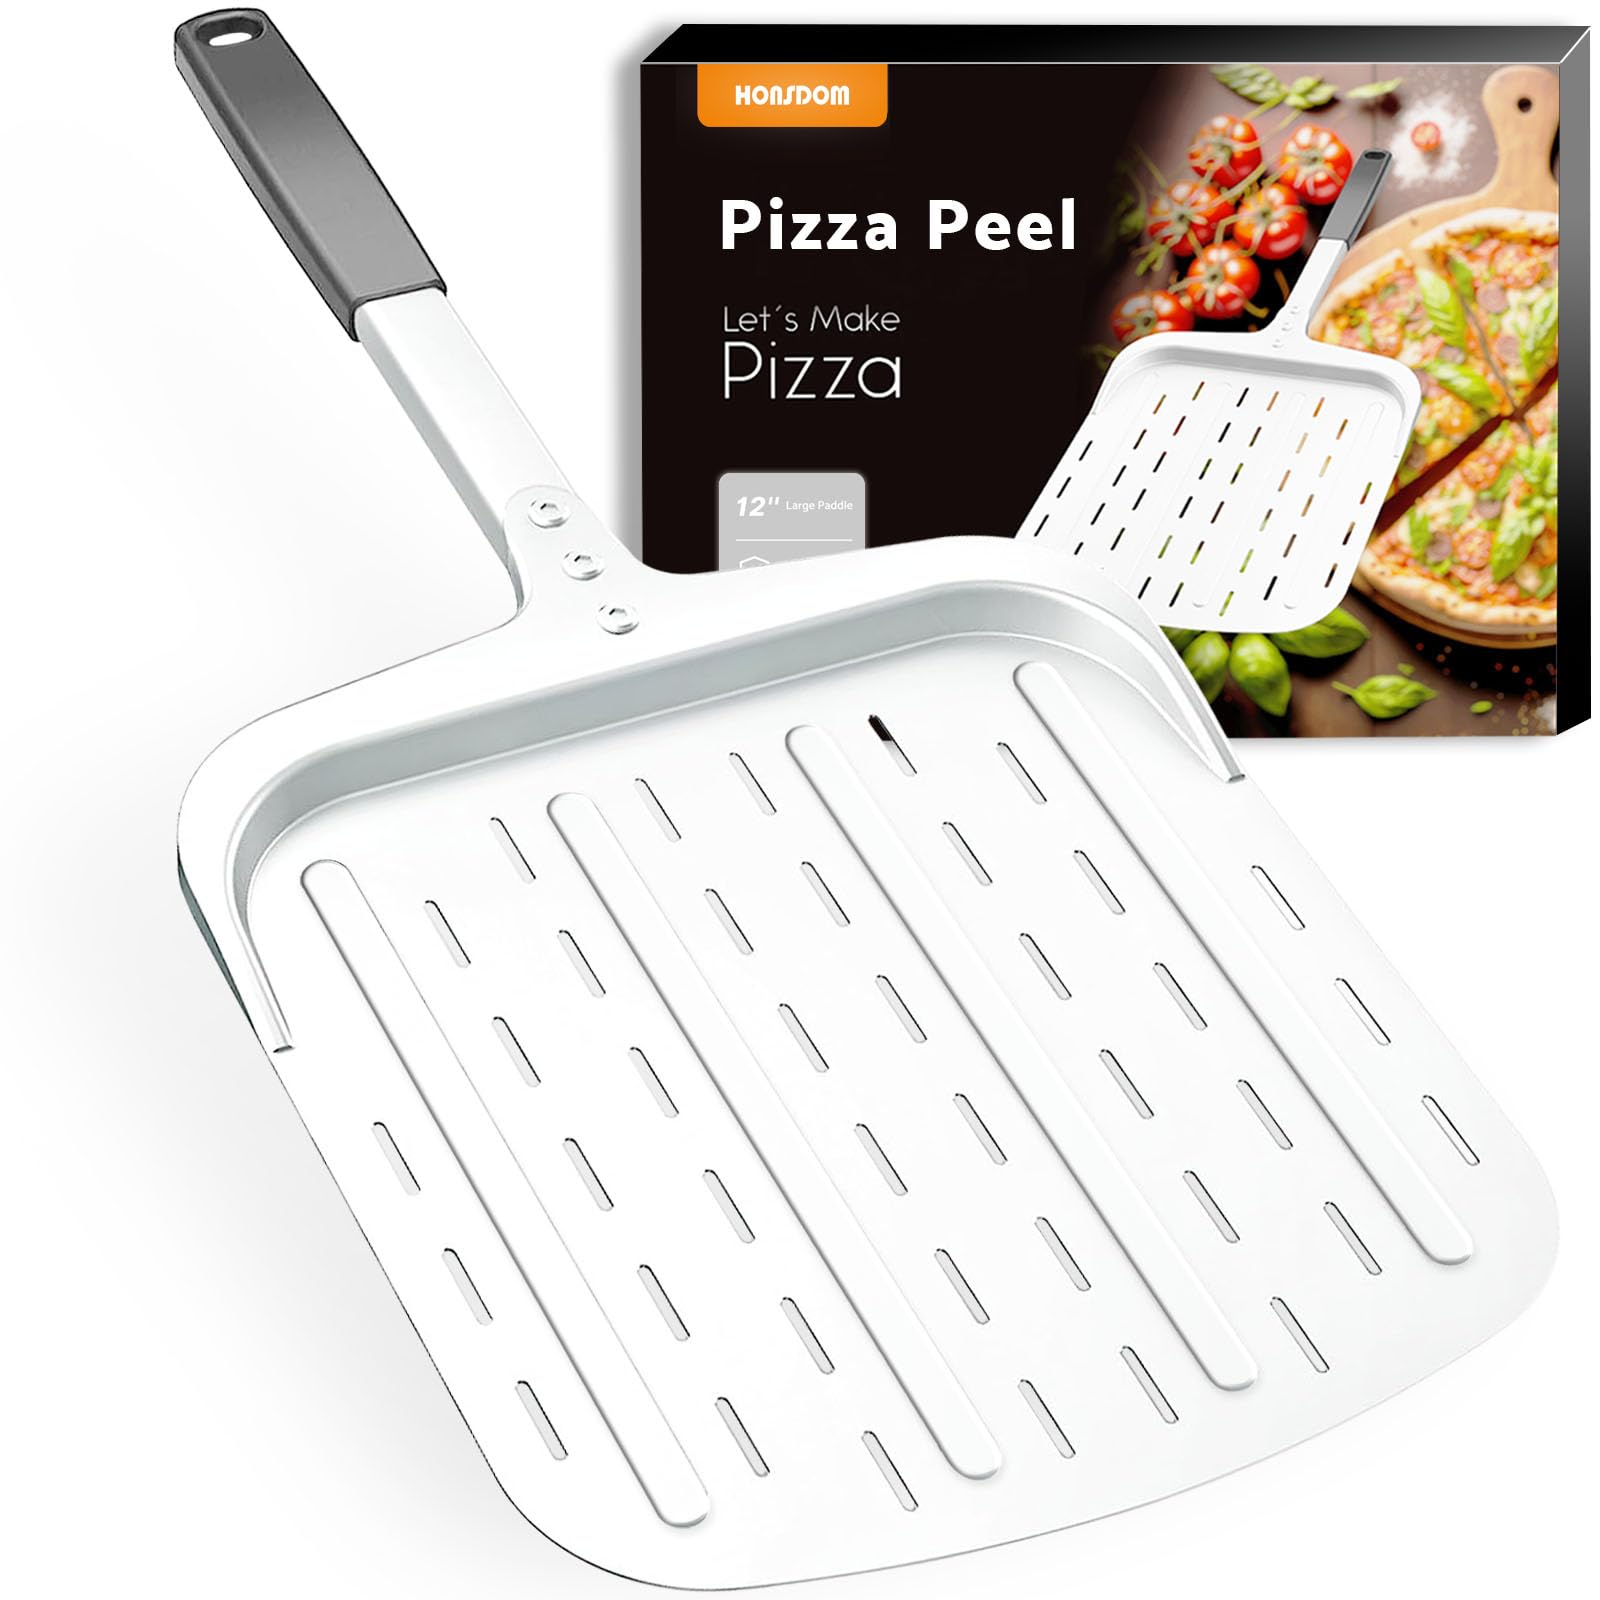 Honsdom Perforated Pizza Peel 12-inch